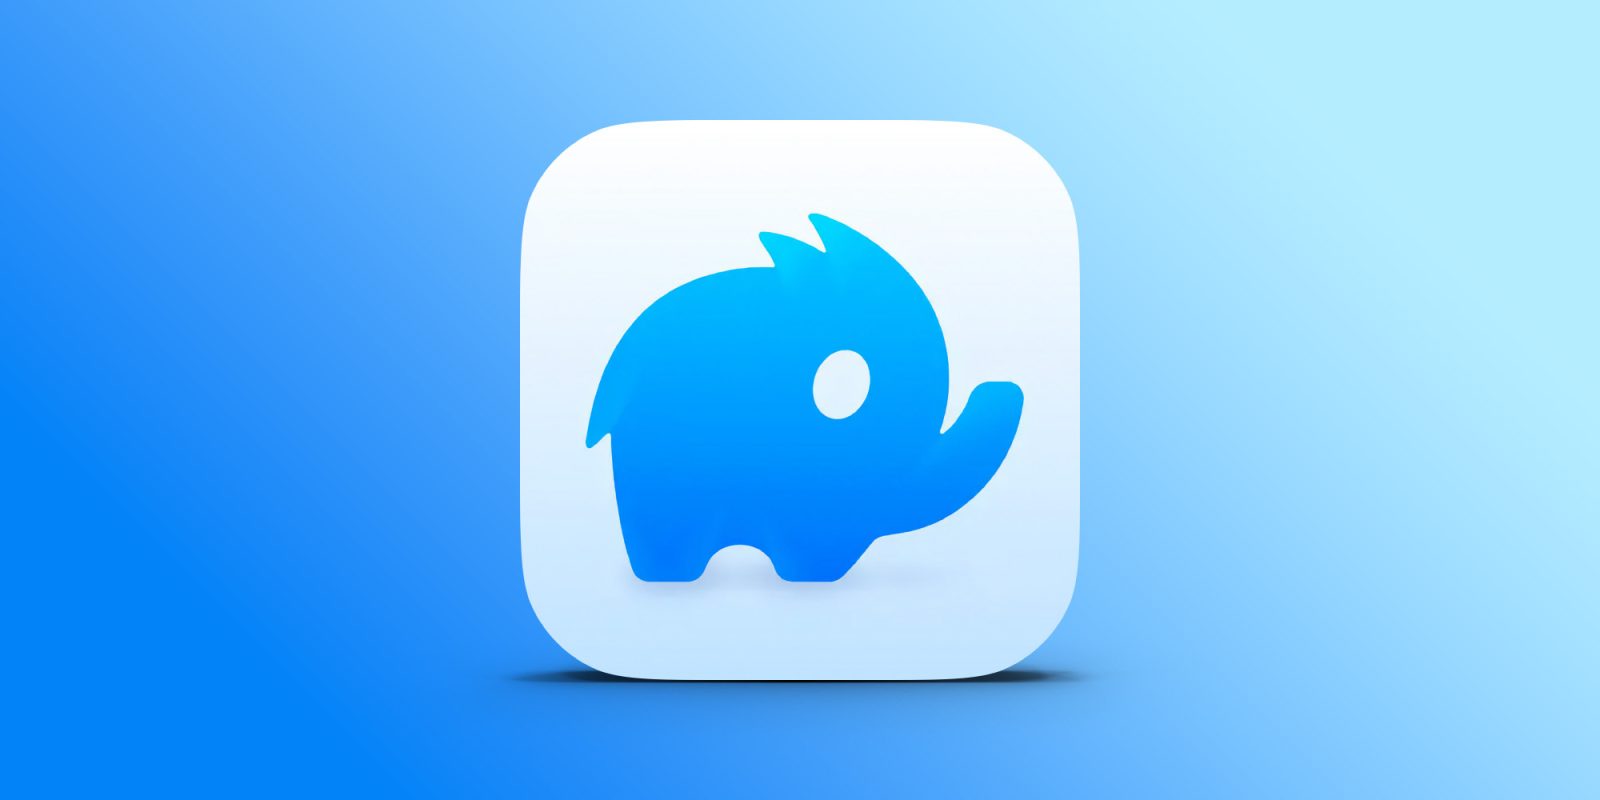 Mammoth is a new free Mastodon client for iOS and macOS